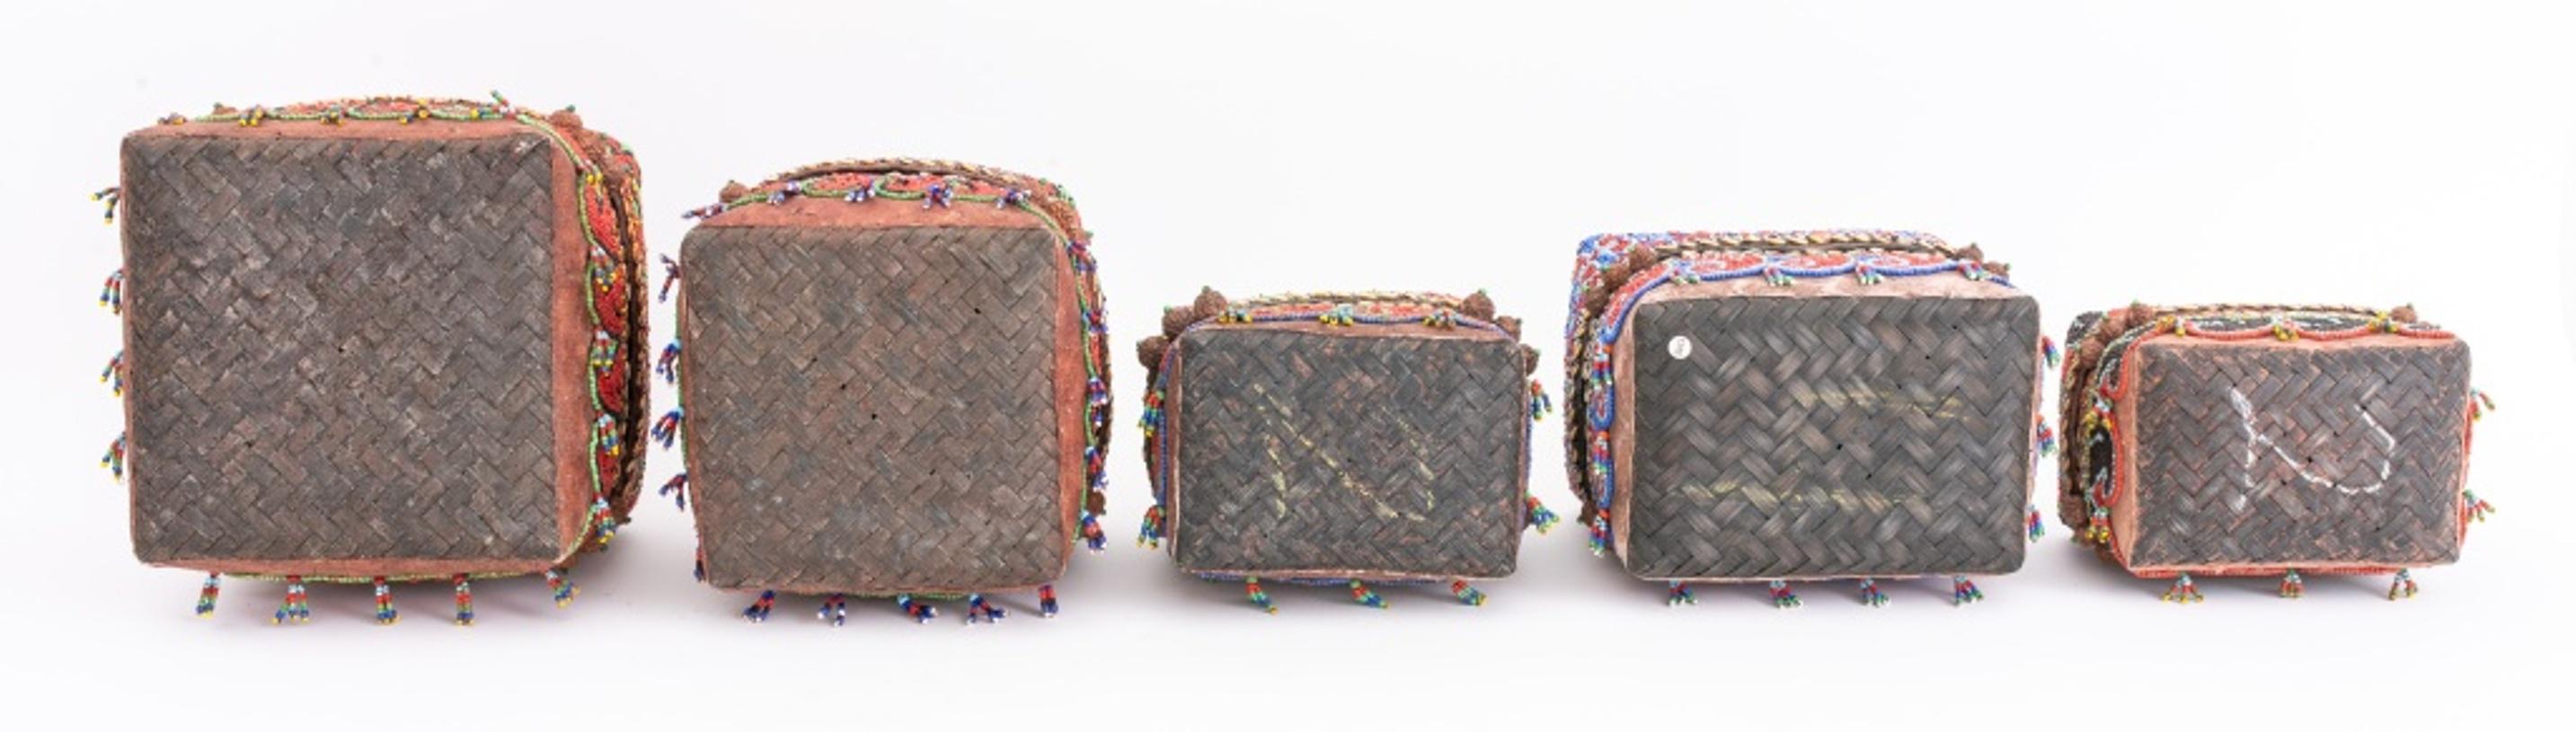 Sumatran Beaded Boxes, Group of 9 For Sale 7